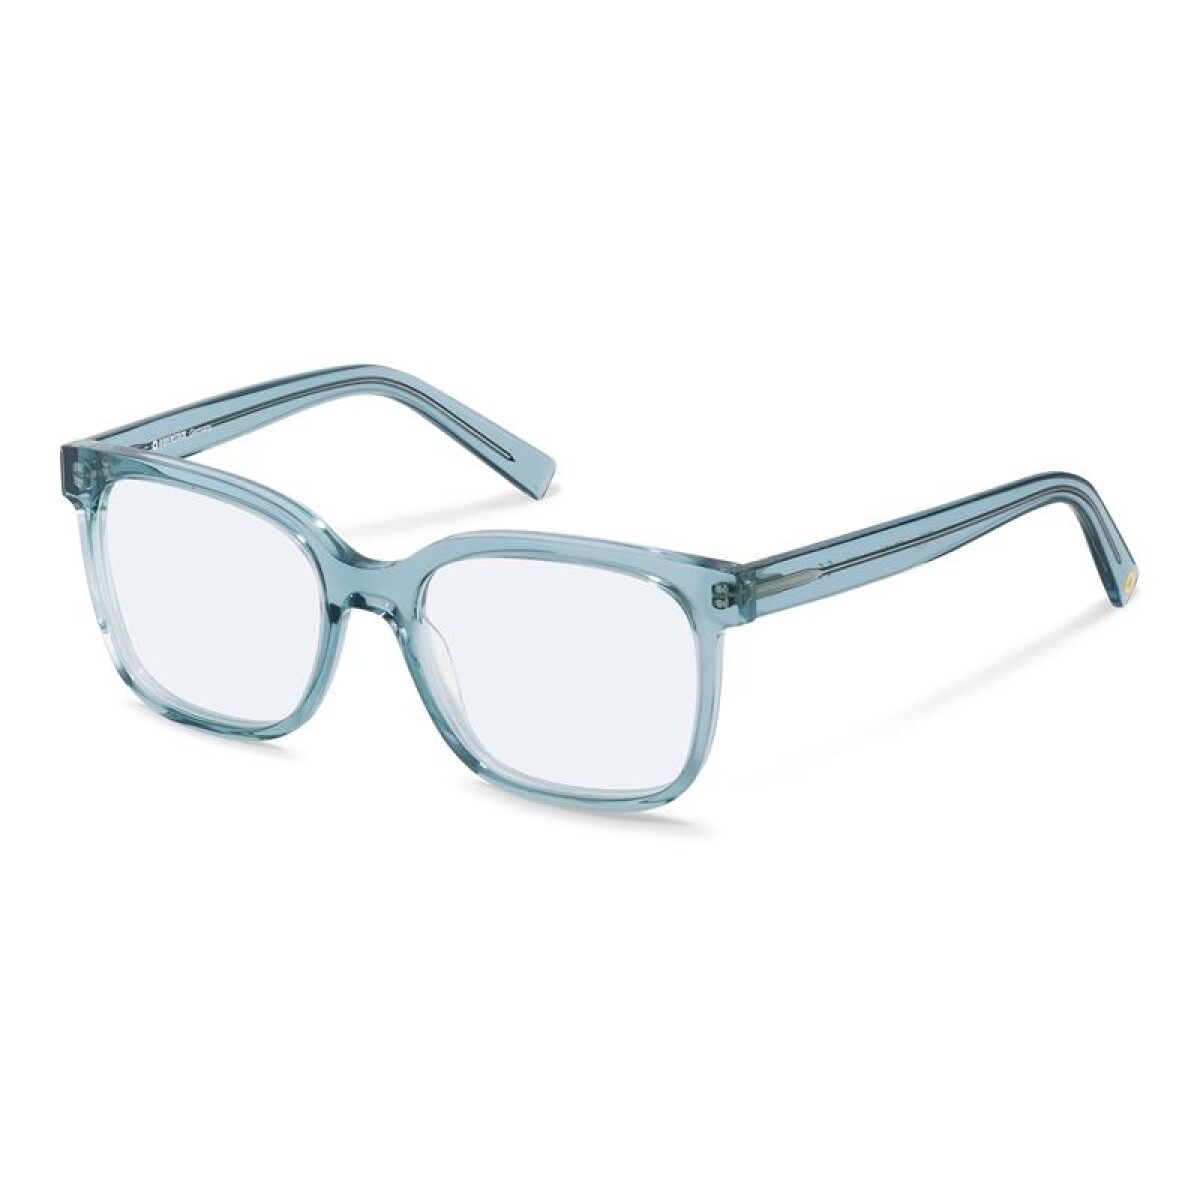 Rodenstock Rr464 - A 